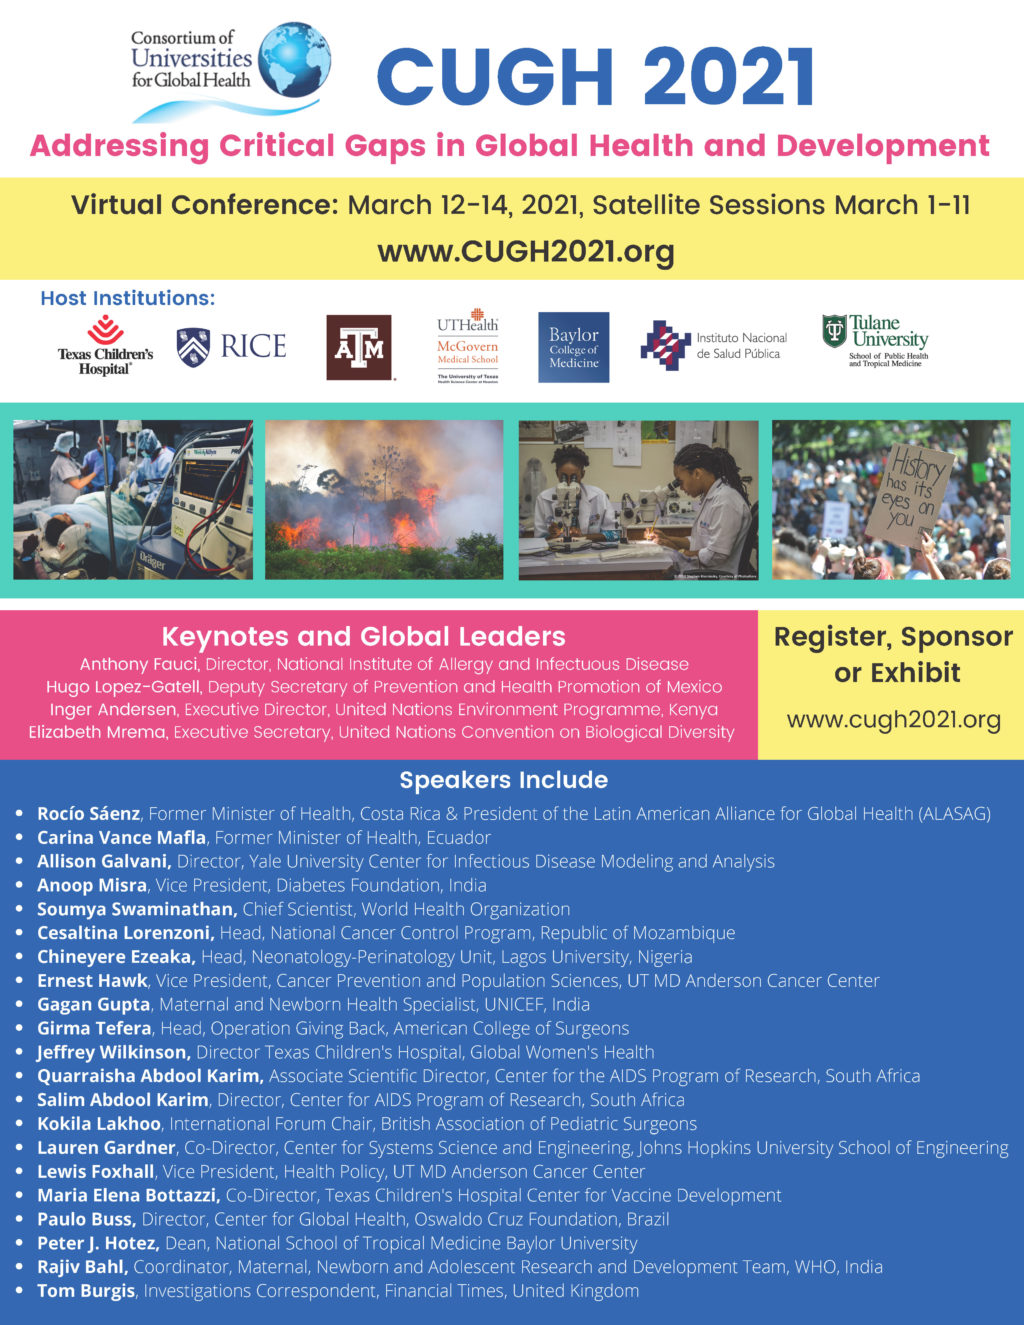 Flyer for CUGH 2021 meeting reading: 
CUGH 2021 Addressing Critical Gaps in Global Health and Development
Virtual Conference: March 12-14, 2021, Satellite Sessions March 1-11
www.CUGH2021.org